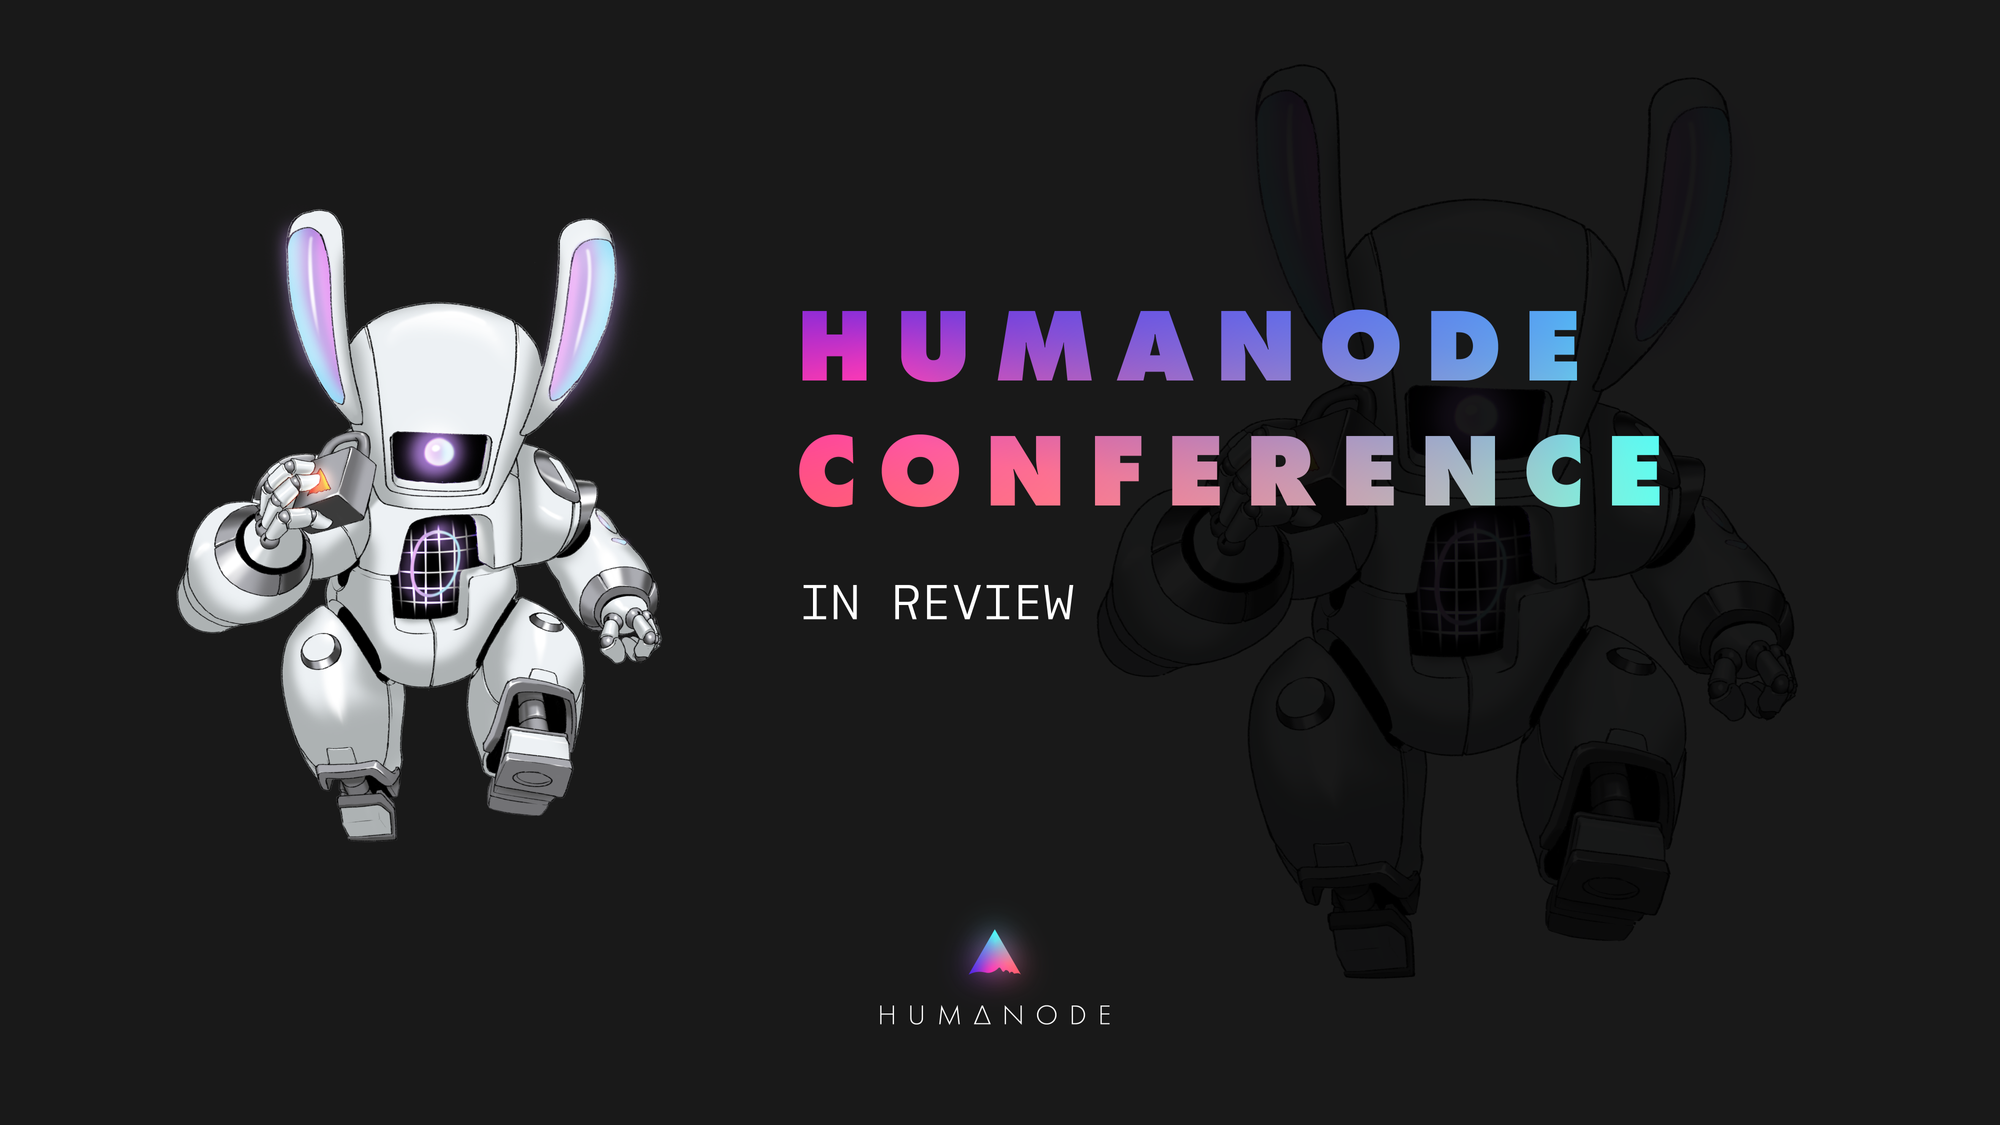 Humanode Conference 2022 - A Review